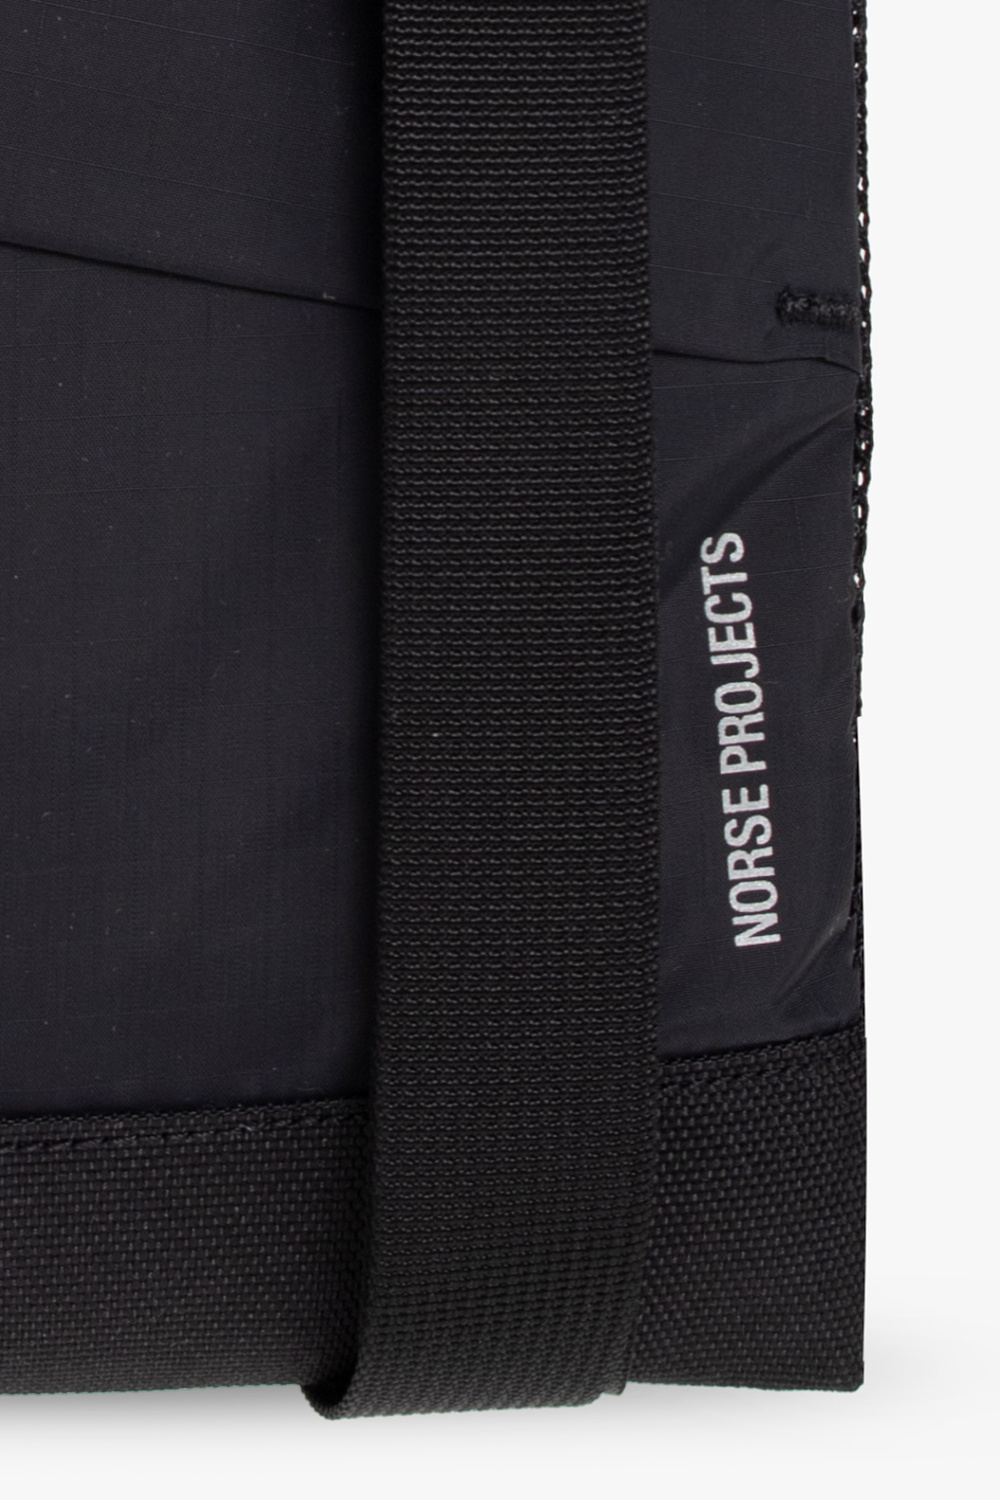 Norse Projects Shoulder bag canvas with logo